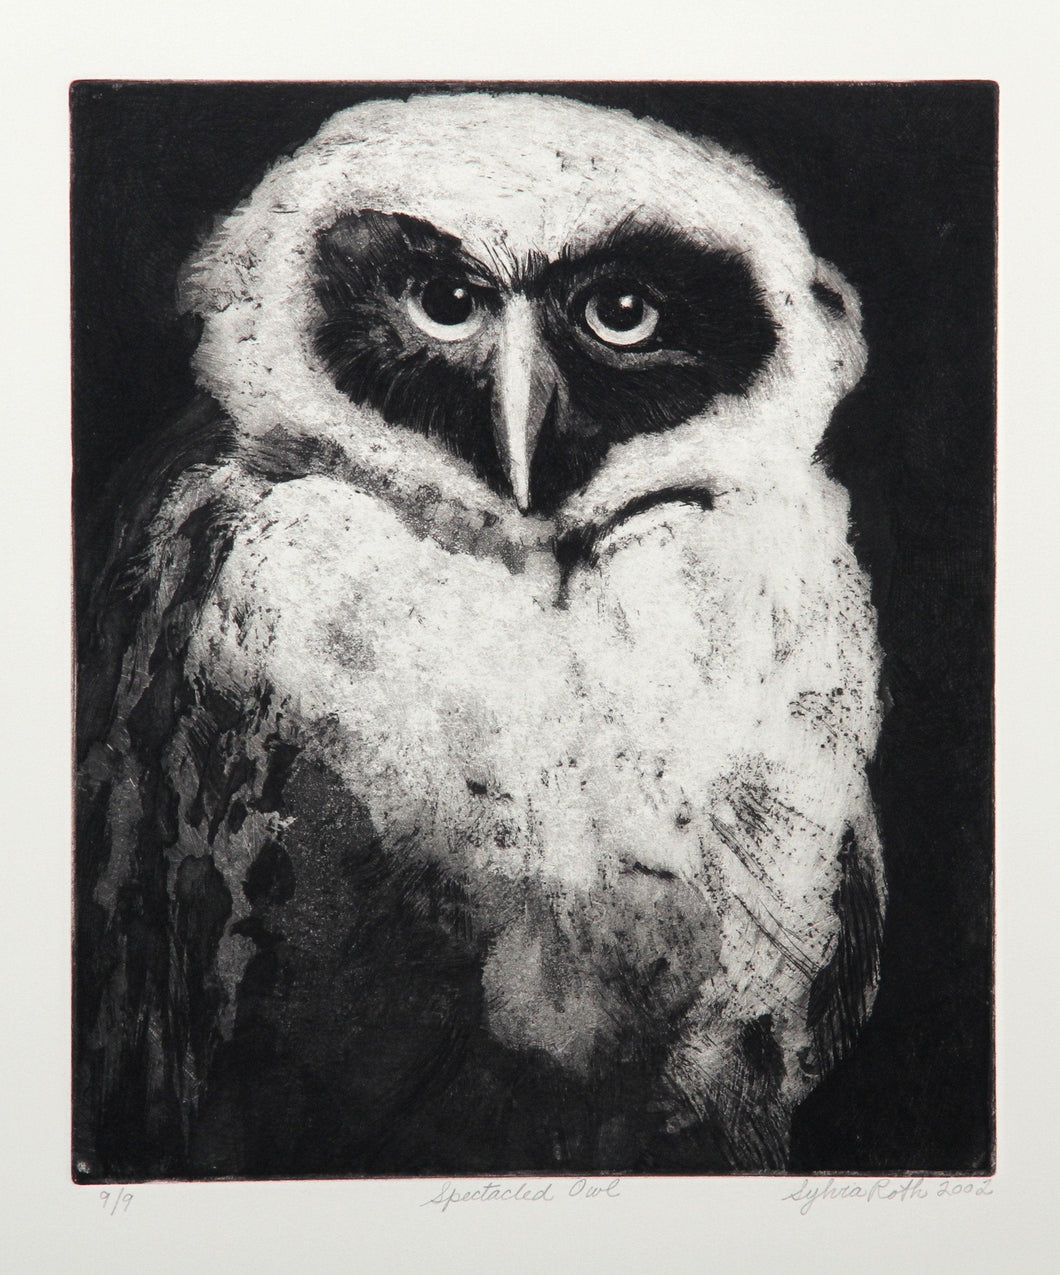 Spectacled Owl Etching | Sylvia Roth,{{product.type}}